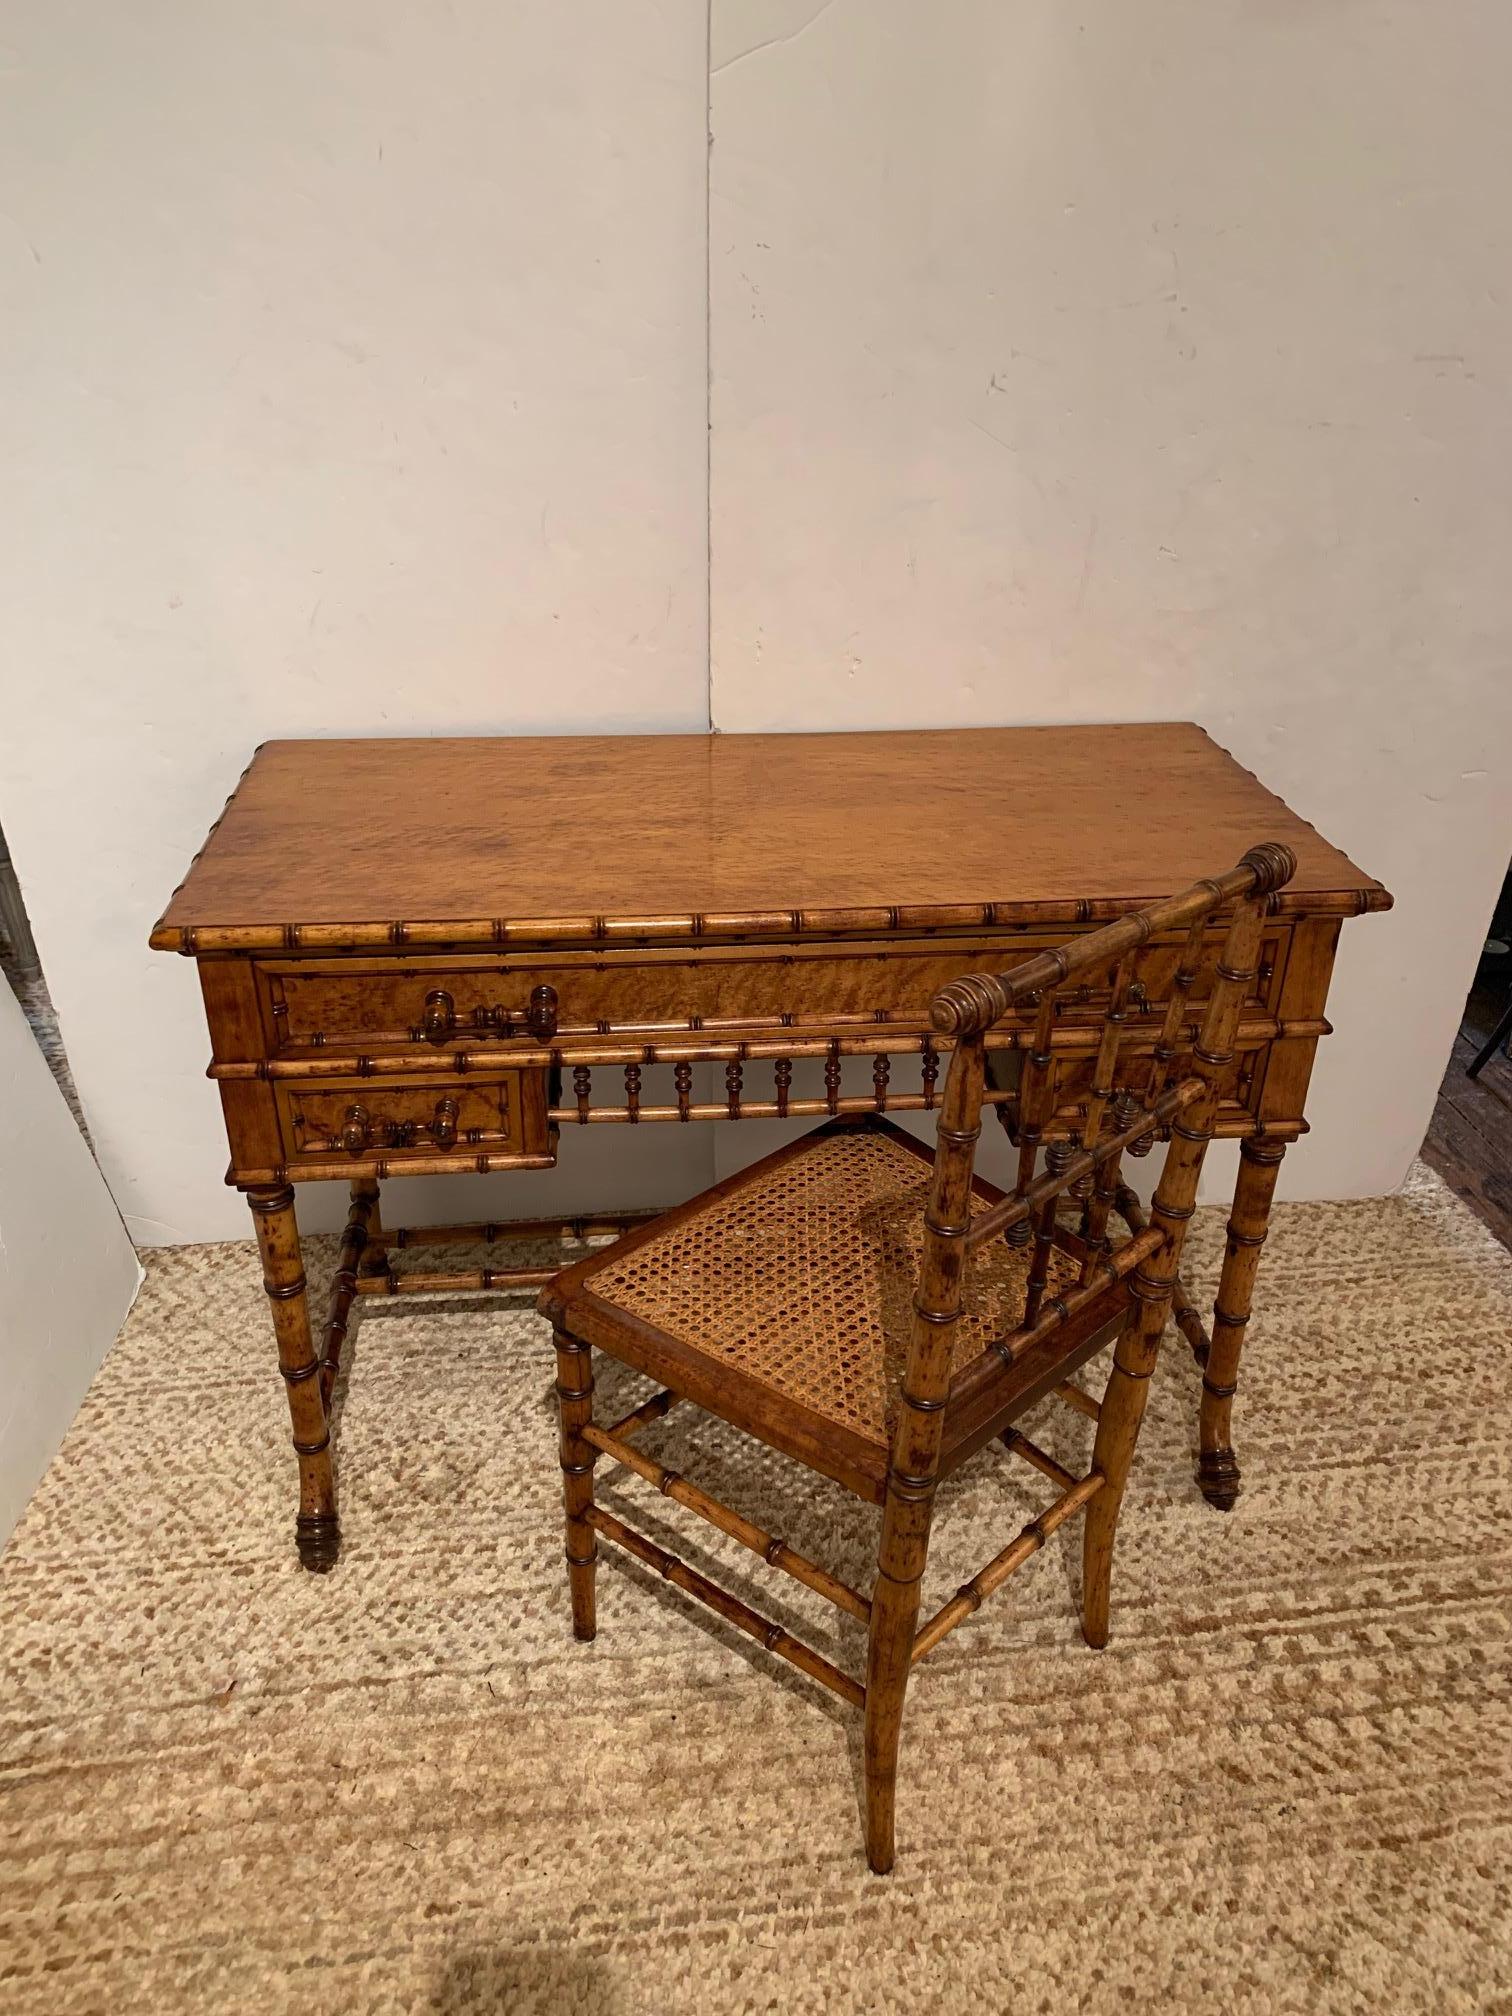 Gorgeous vintage honey colored wood, rattan and bamboo writing desk with matching chair. Desk has top long drawer with two smaller drawers beneath. 
 Chair has caned seat. All in very good condition as was just restored.
Measurement for desk is